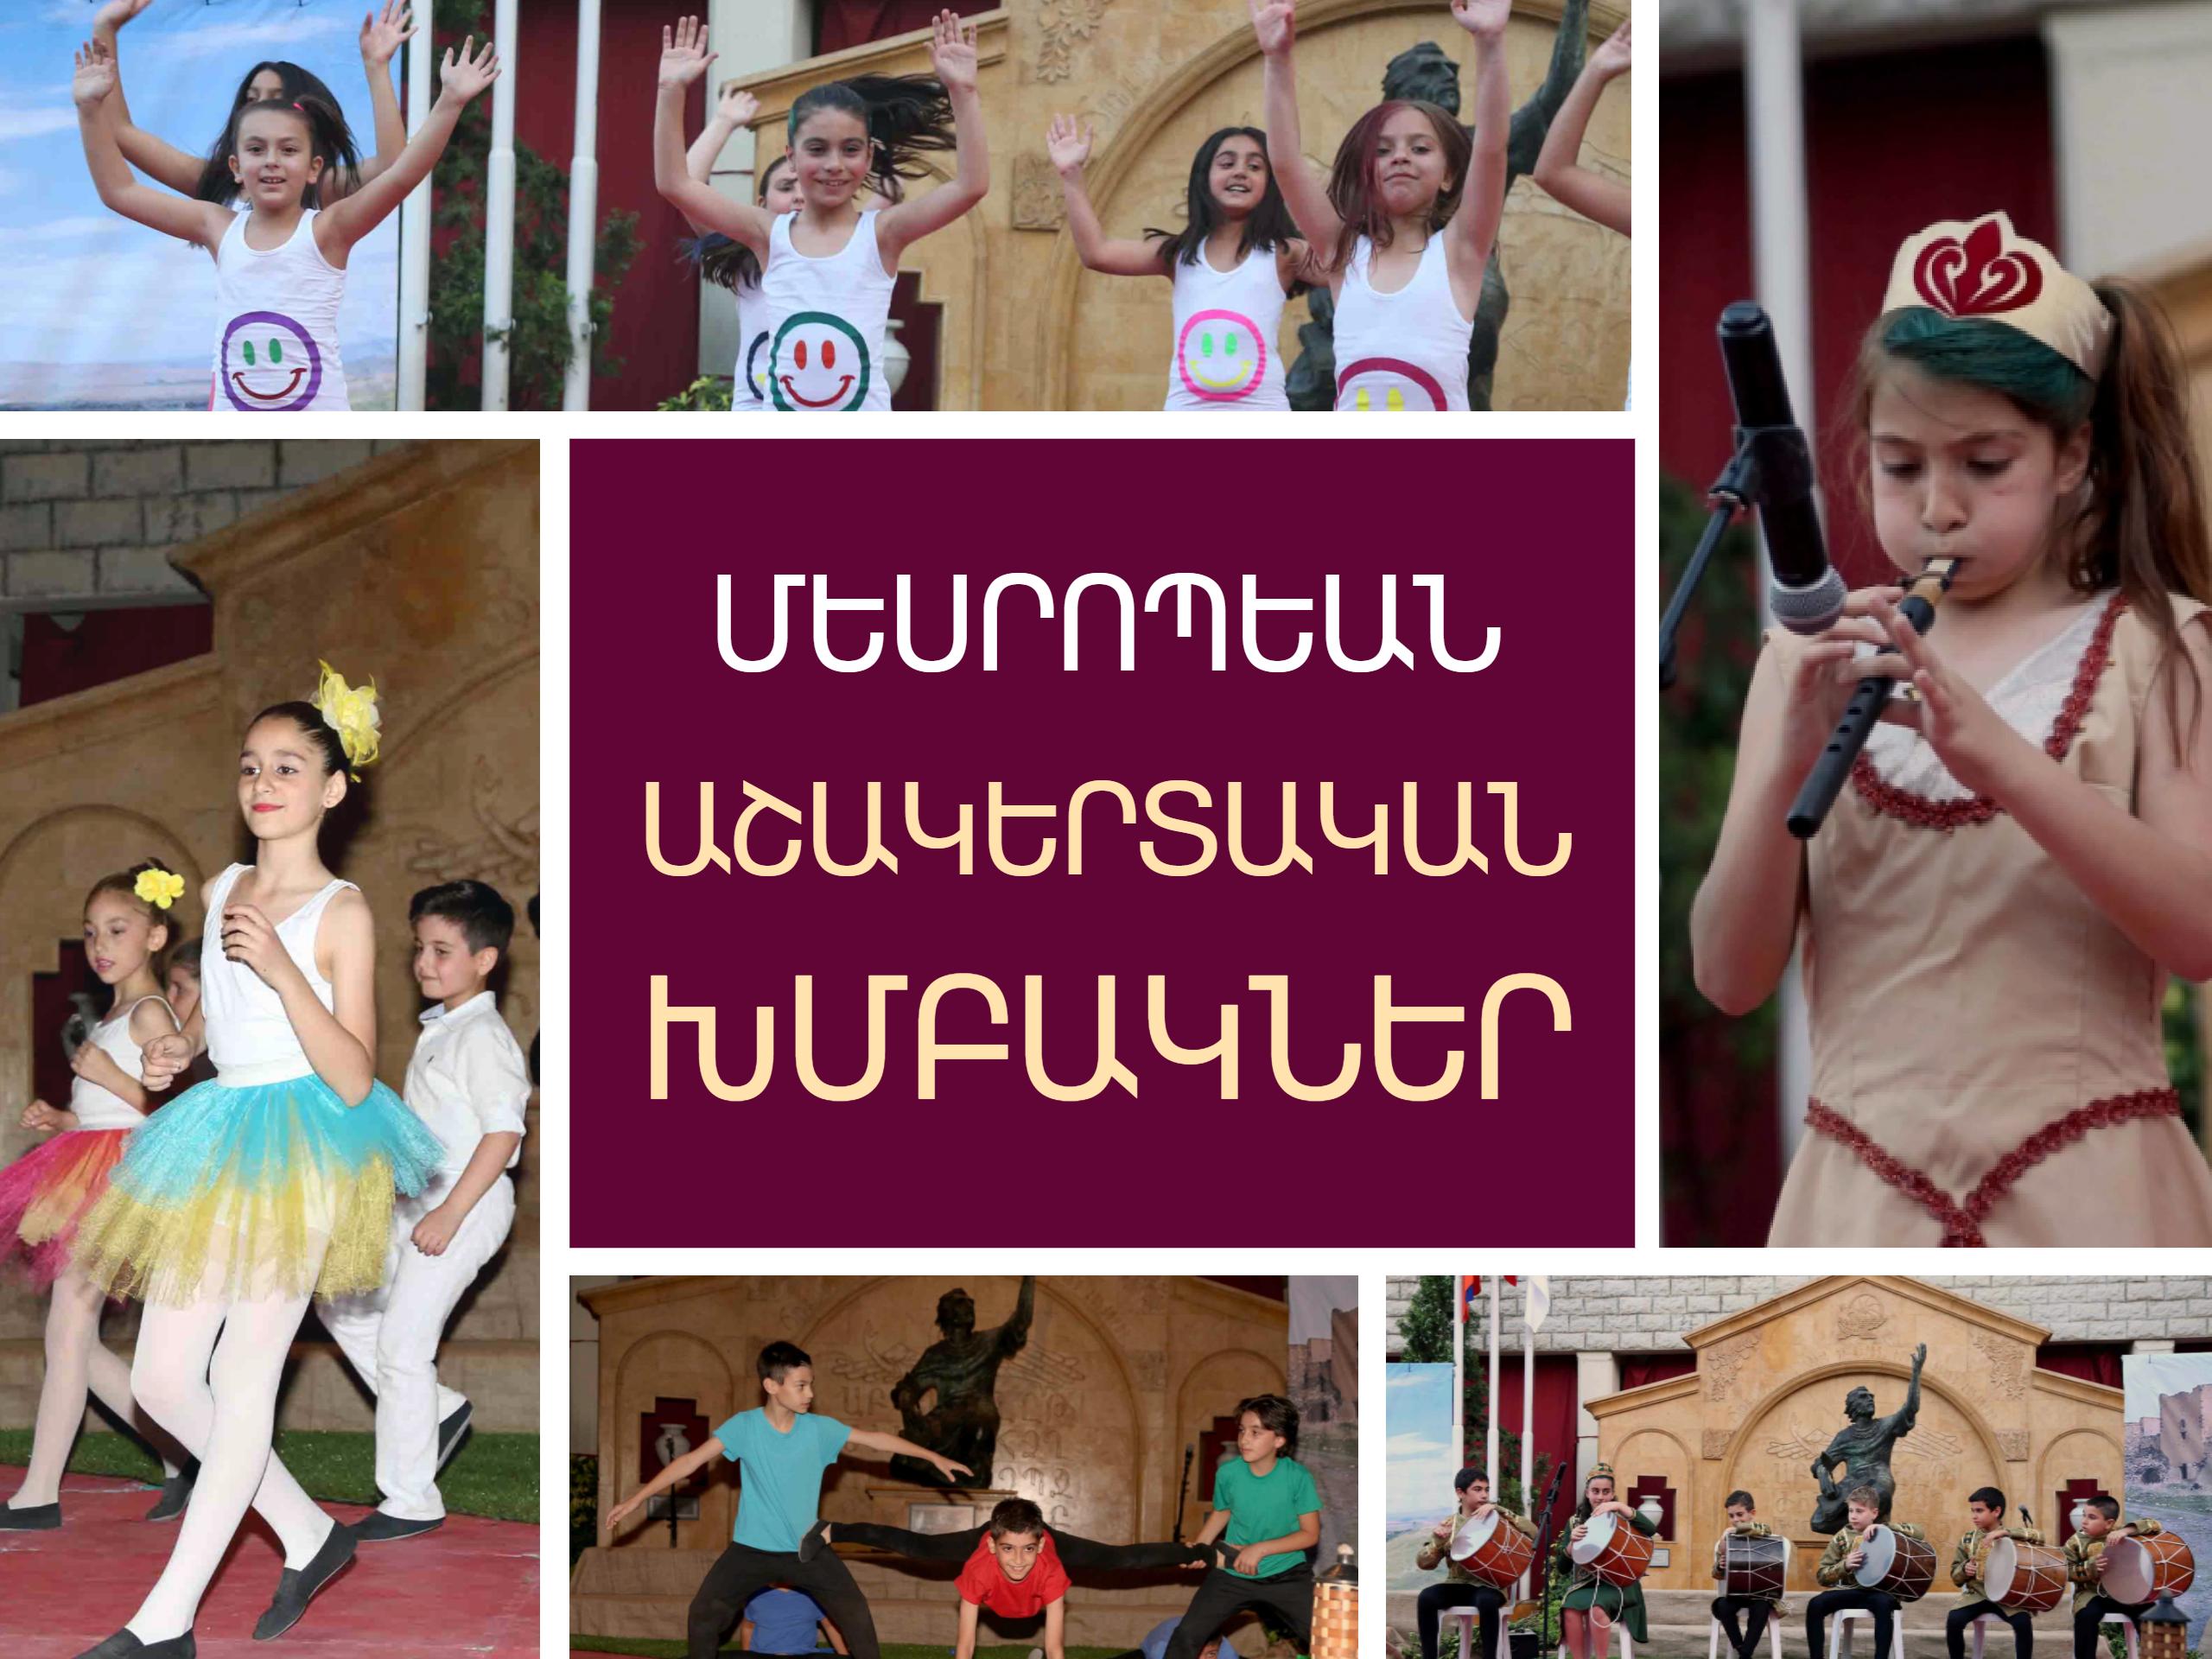 20 arts and sports groups start their activities in Mesrobian